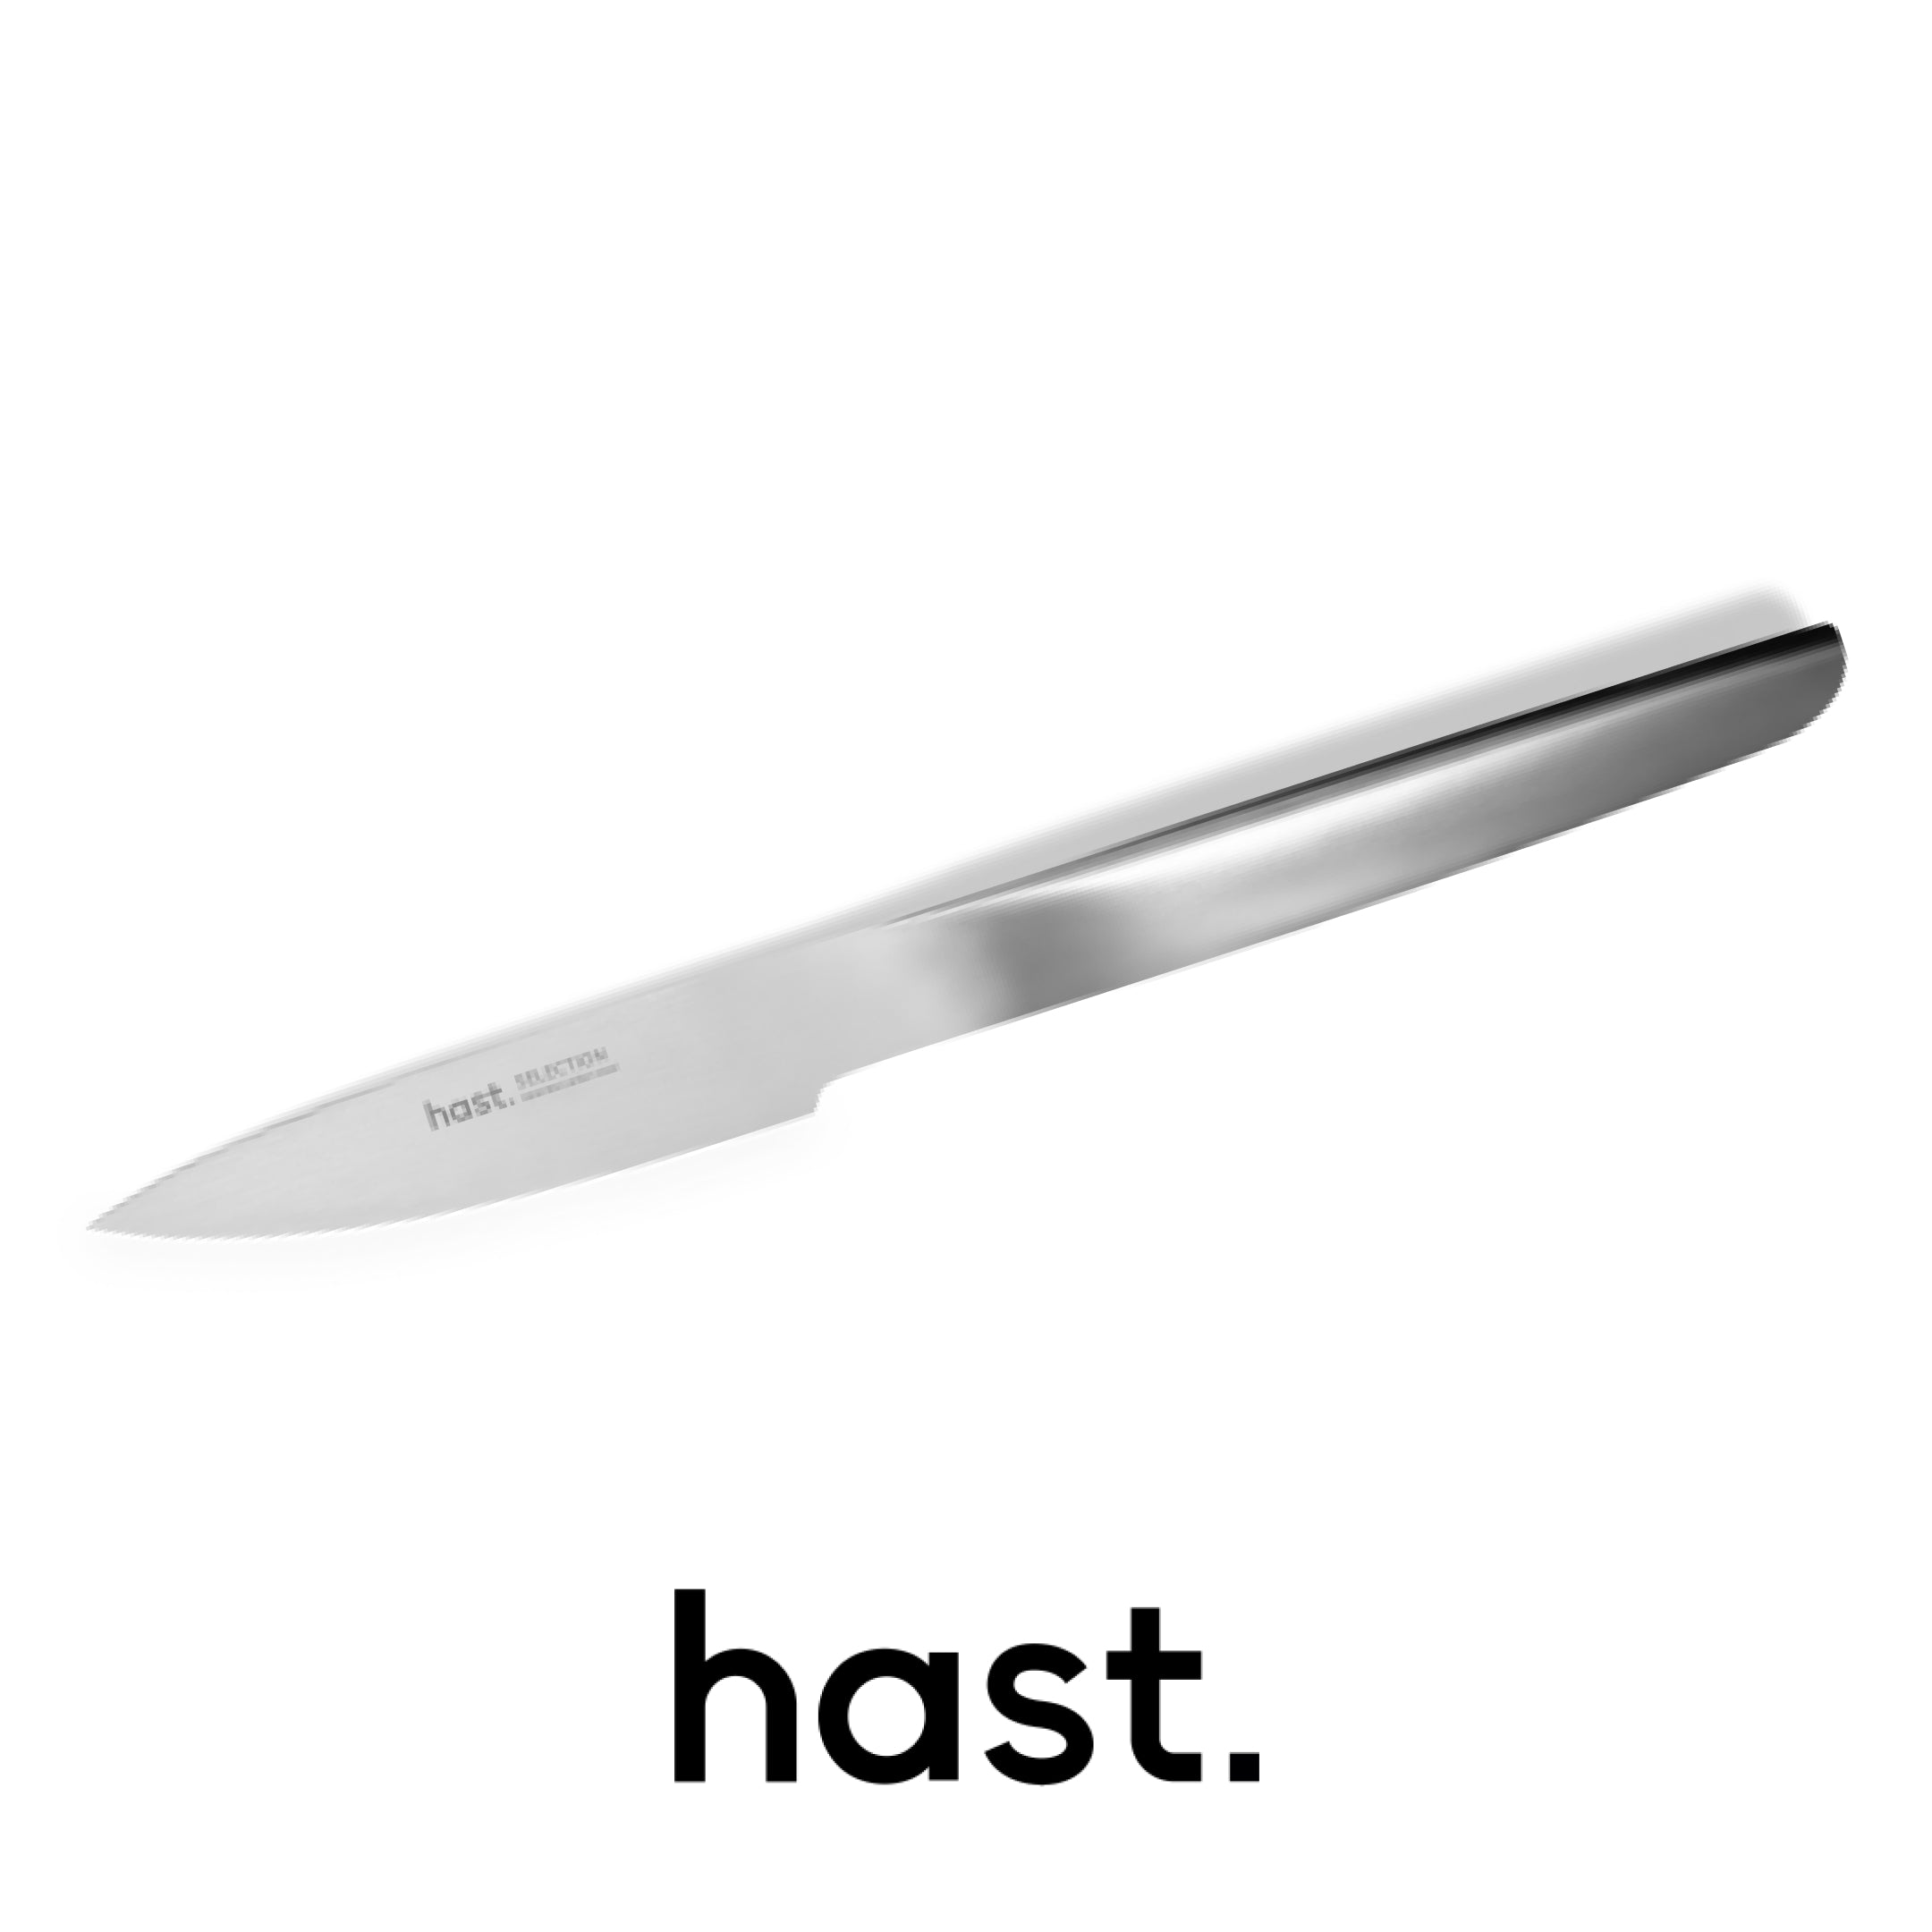 3.5 Inch Japanese carbon steel Paring Knife by Hast